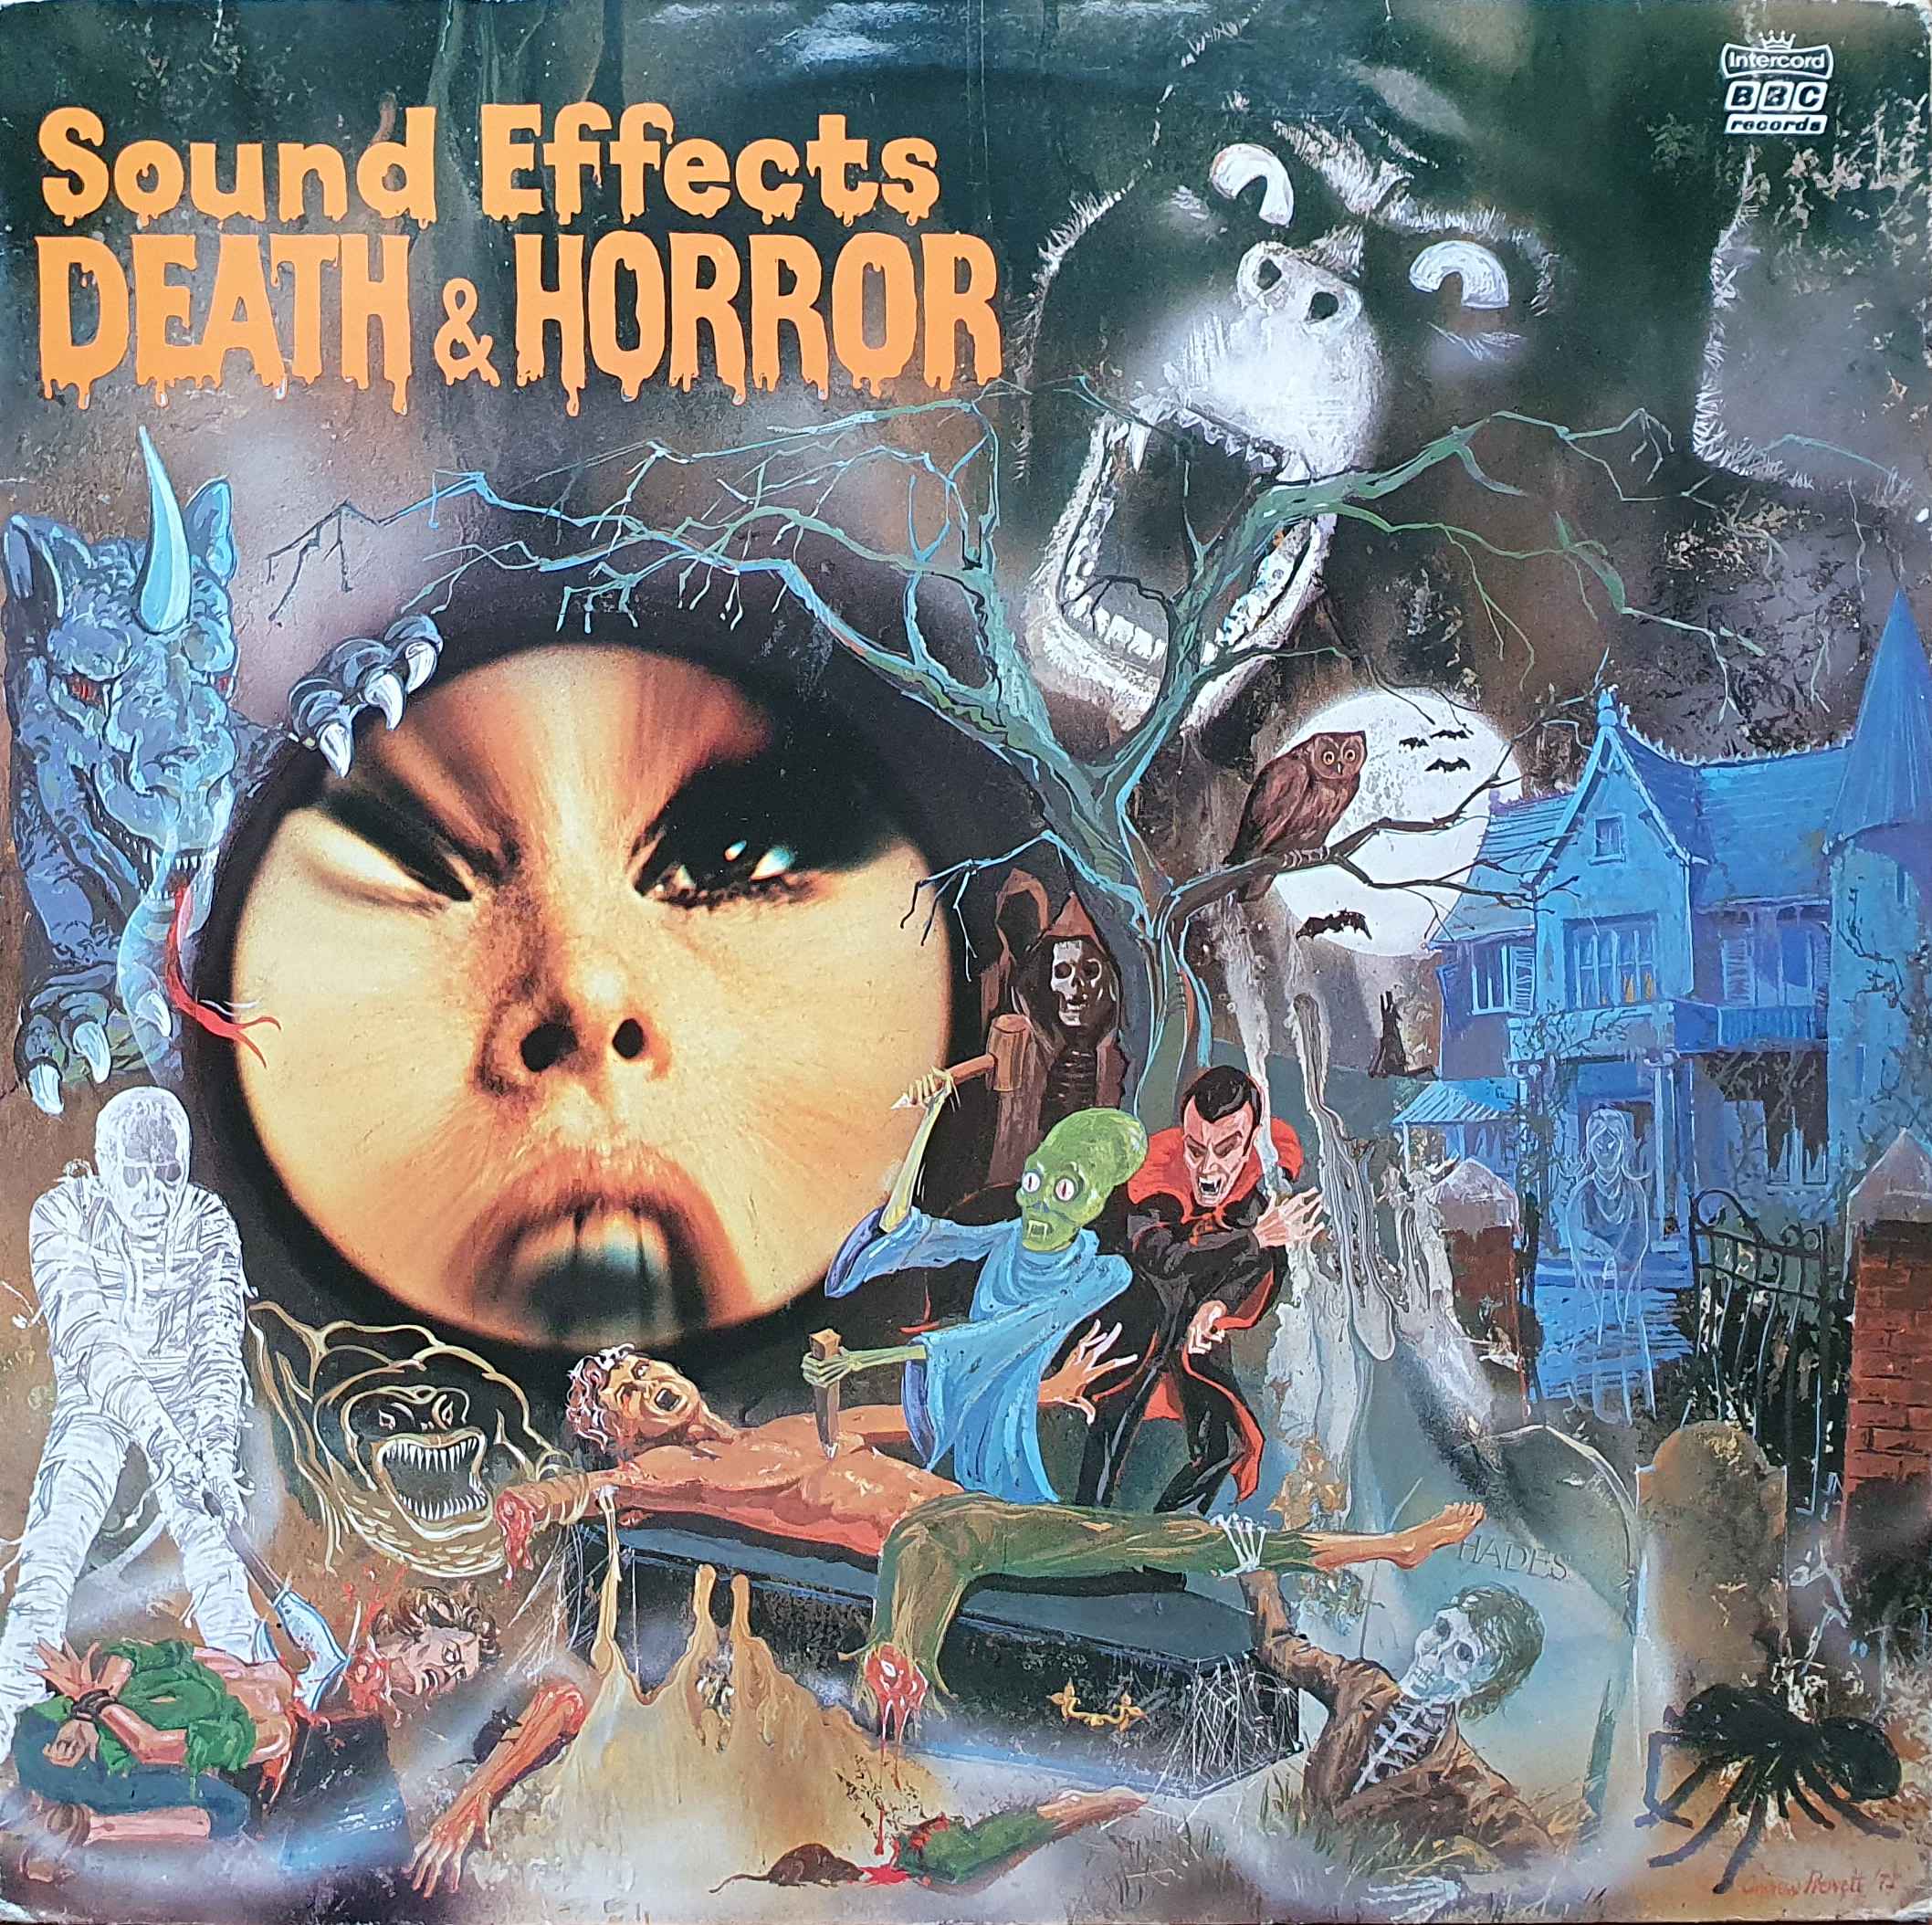 Picture of Death and horror sound effects by artist Mike Harding from the BBC albums - Records and Tapes library